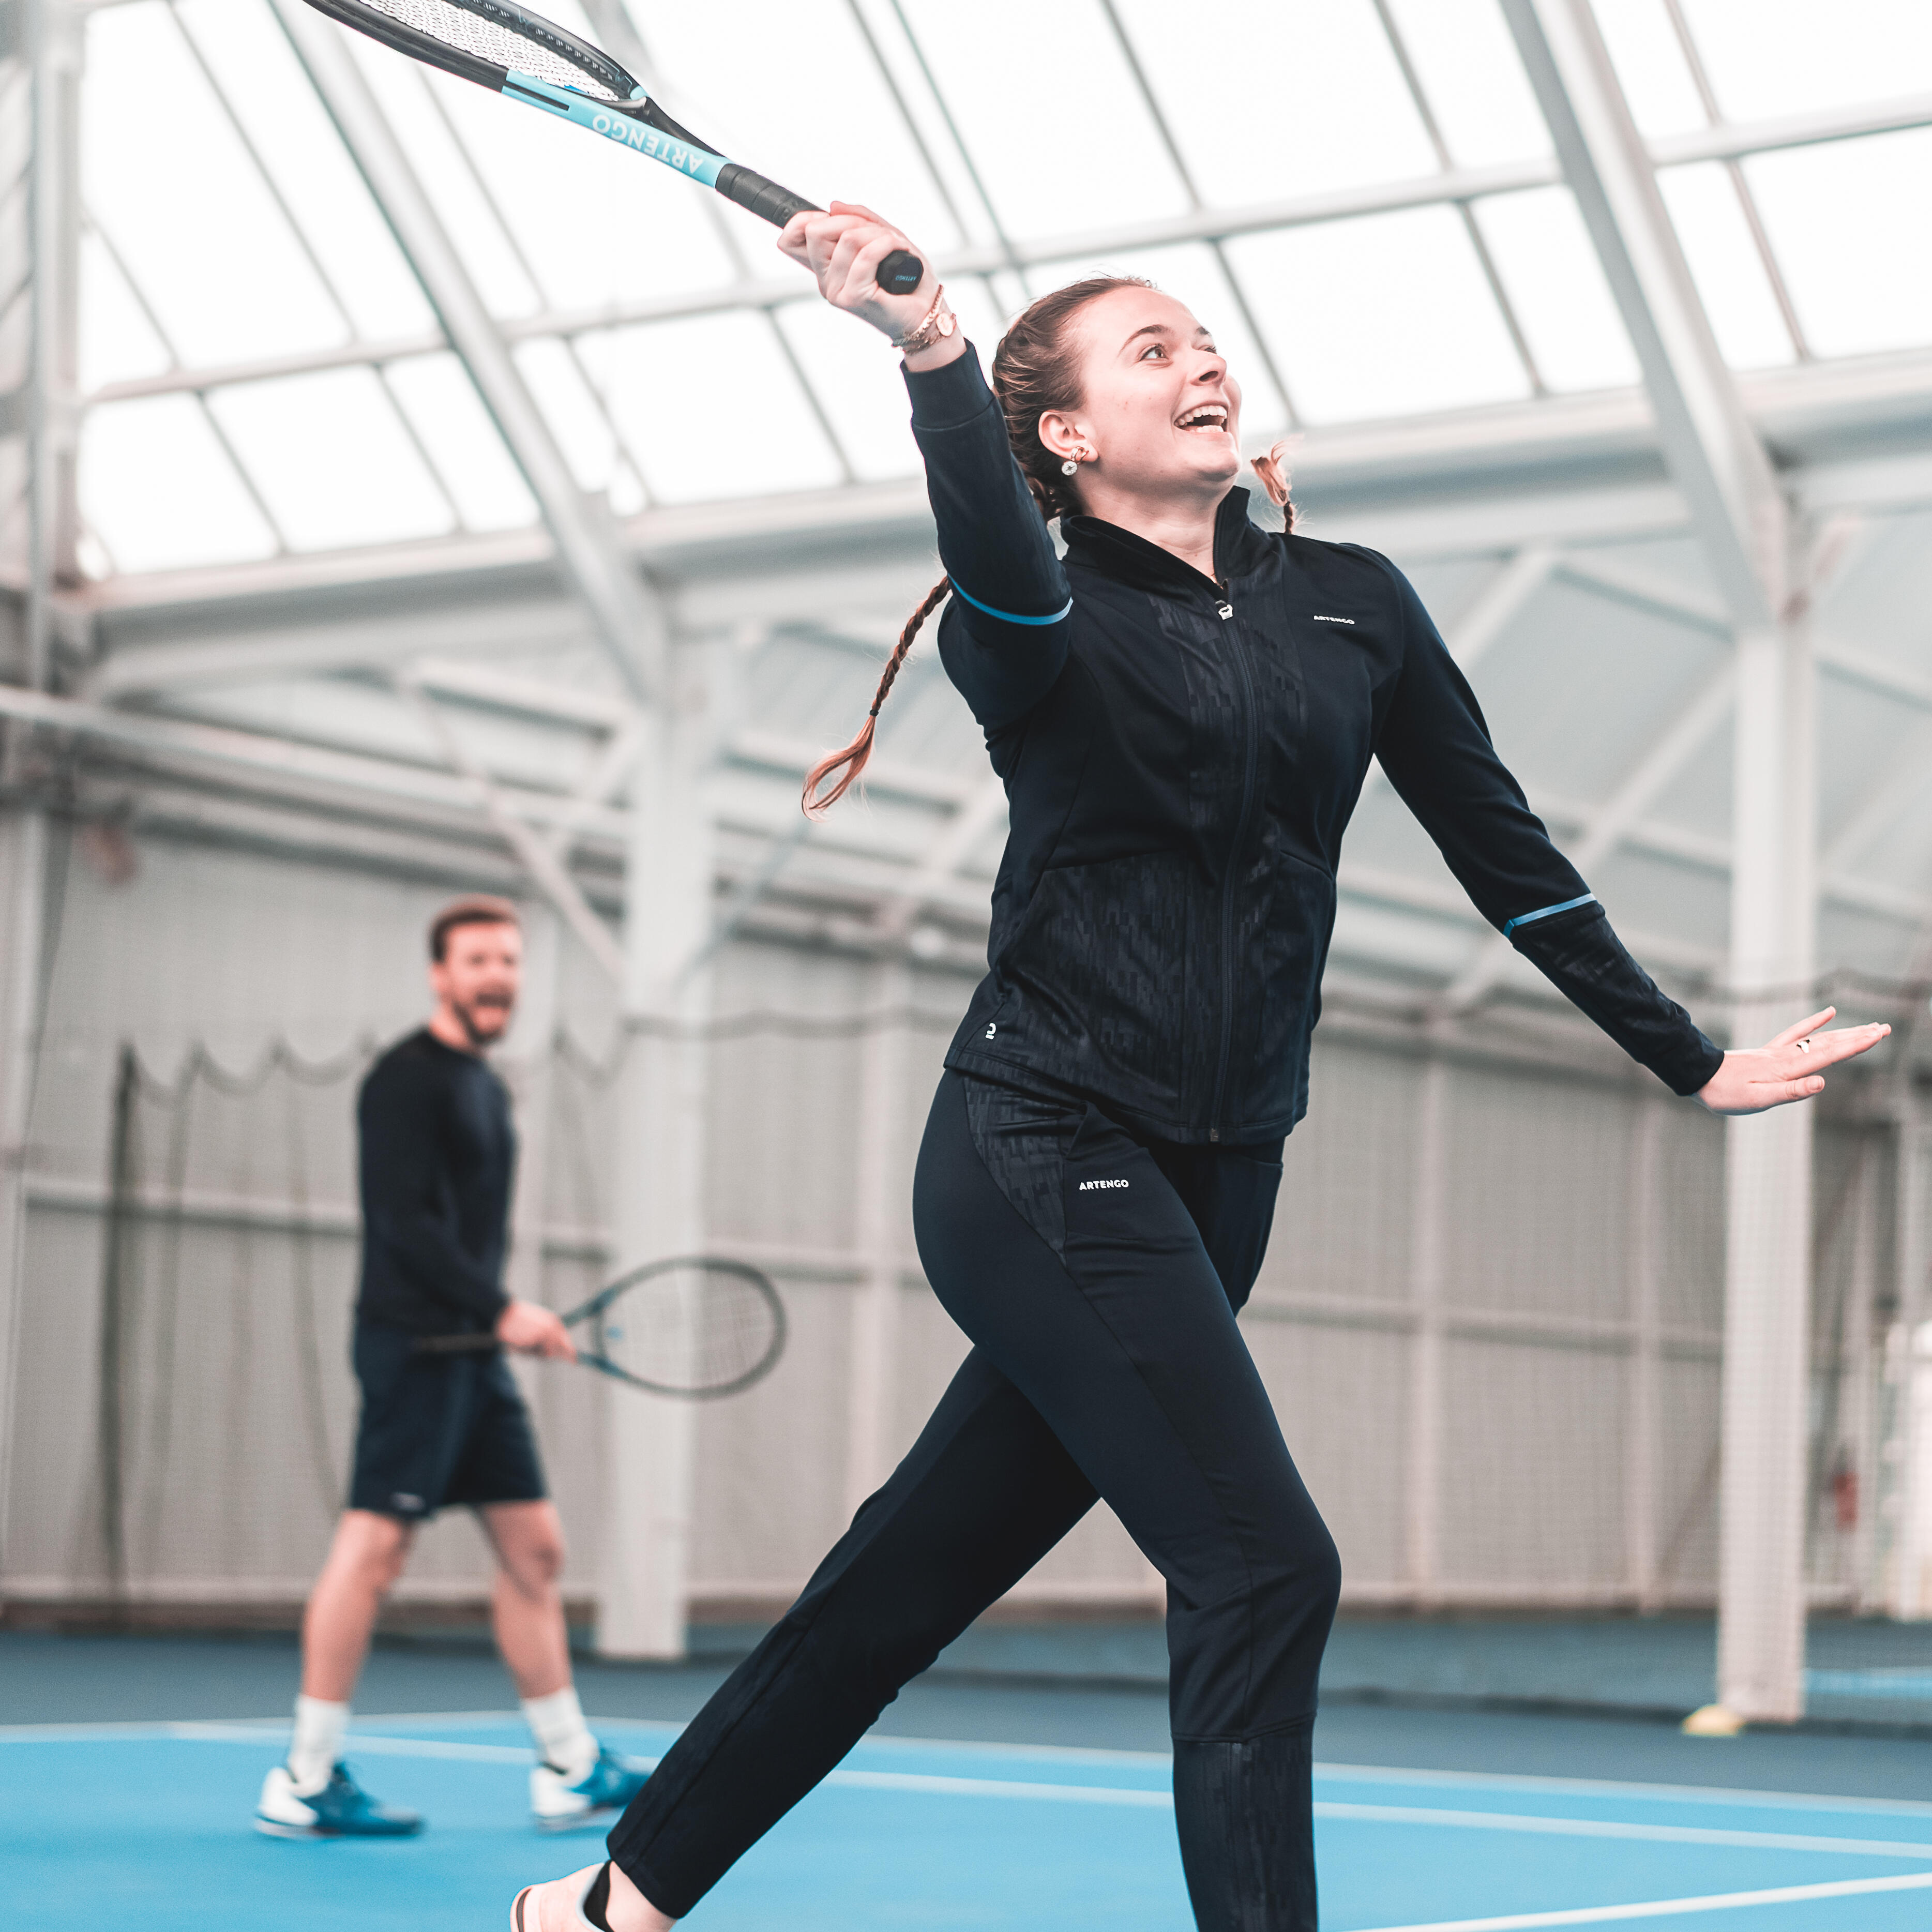 How to grip a tennis racket, Fitness